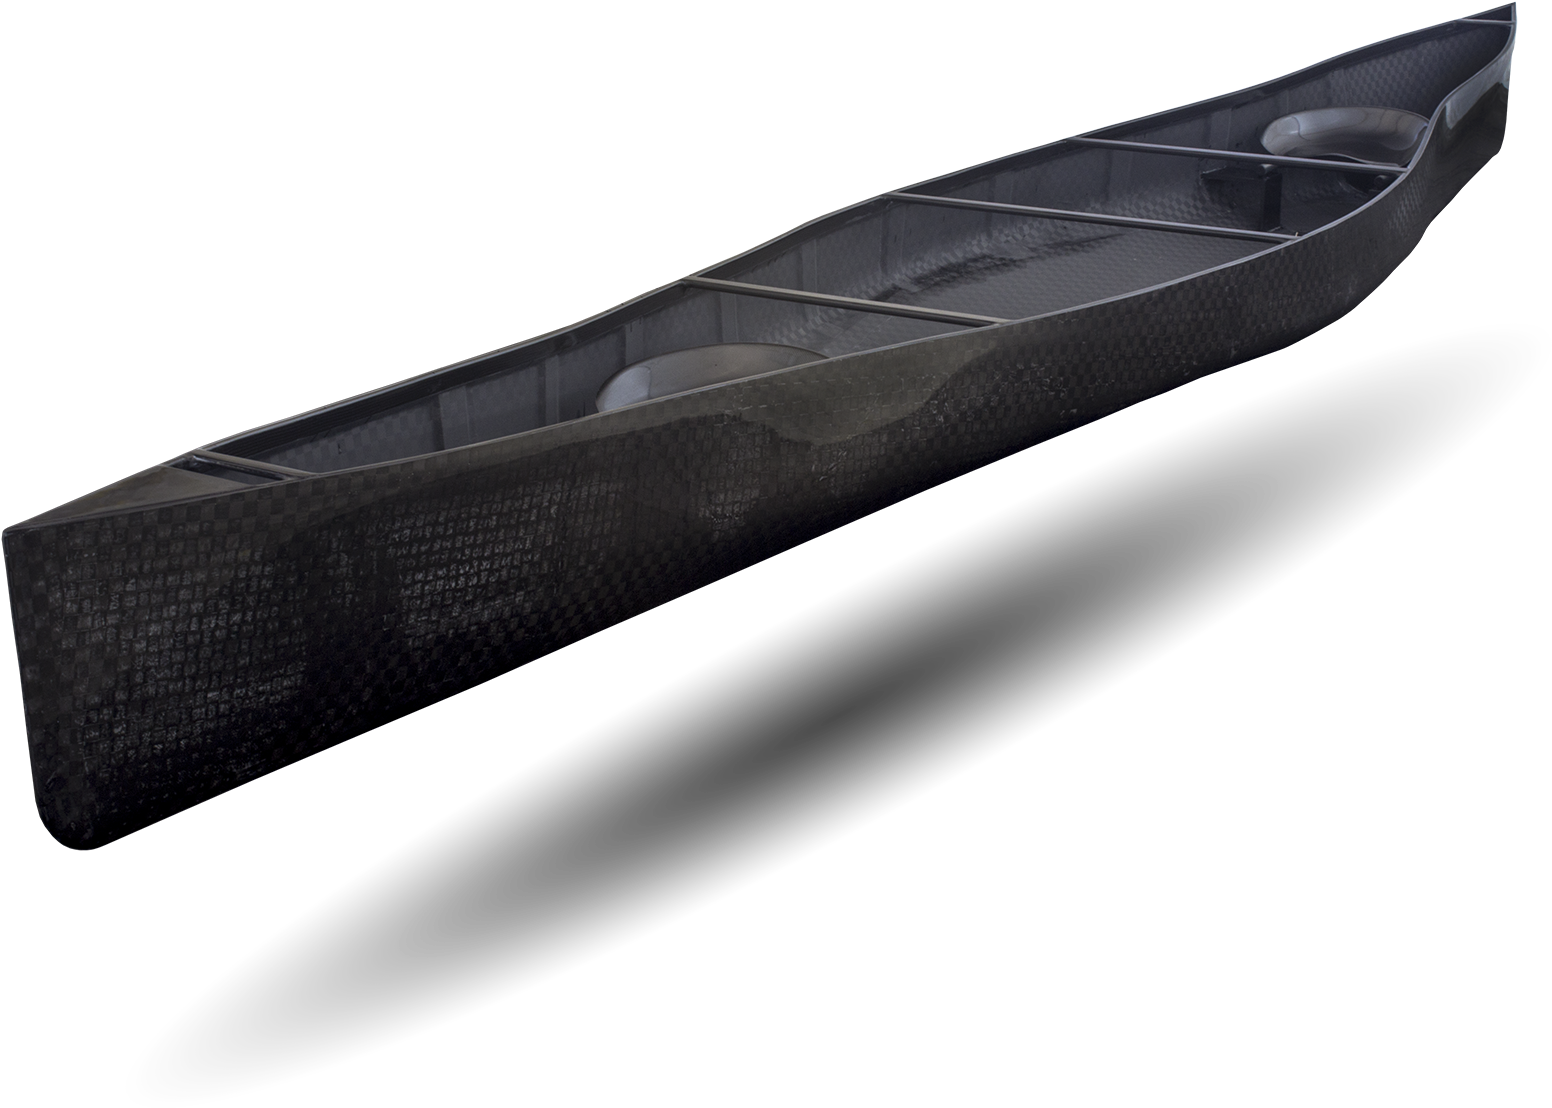 Carbon Fiber Canoe Isolated PNG image